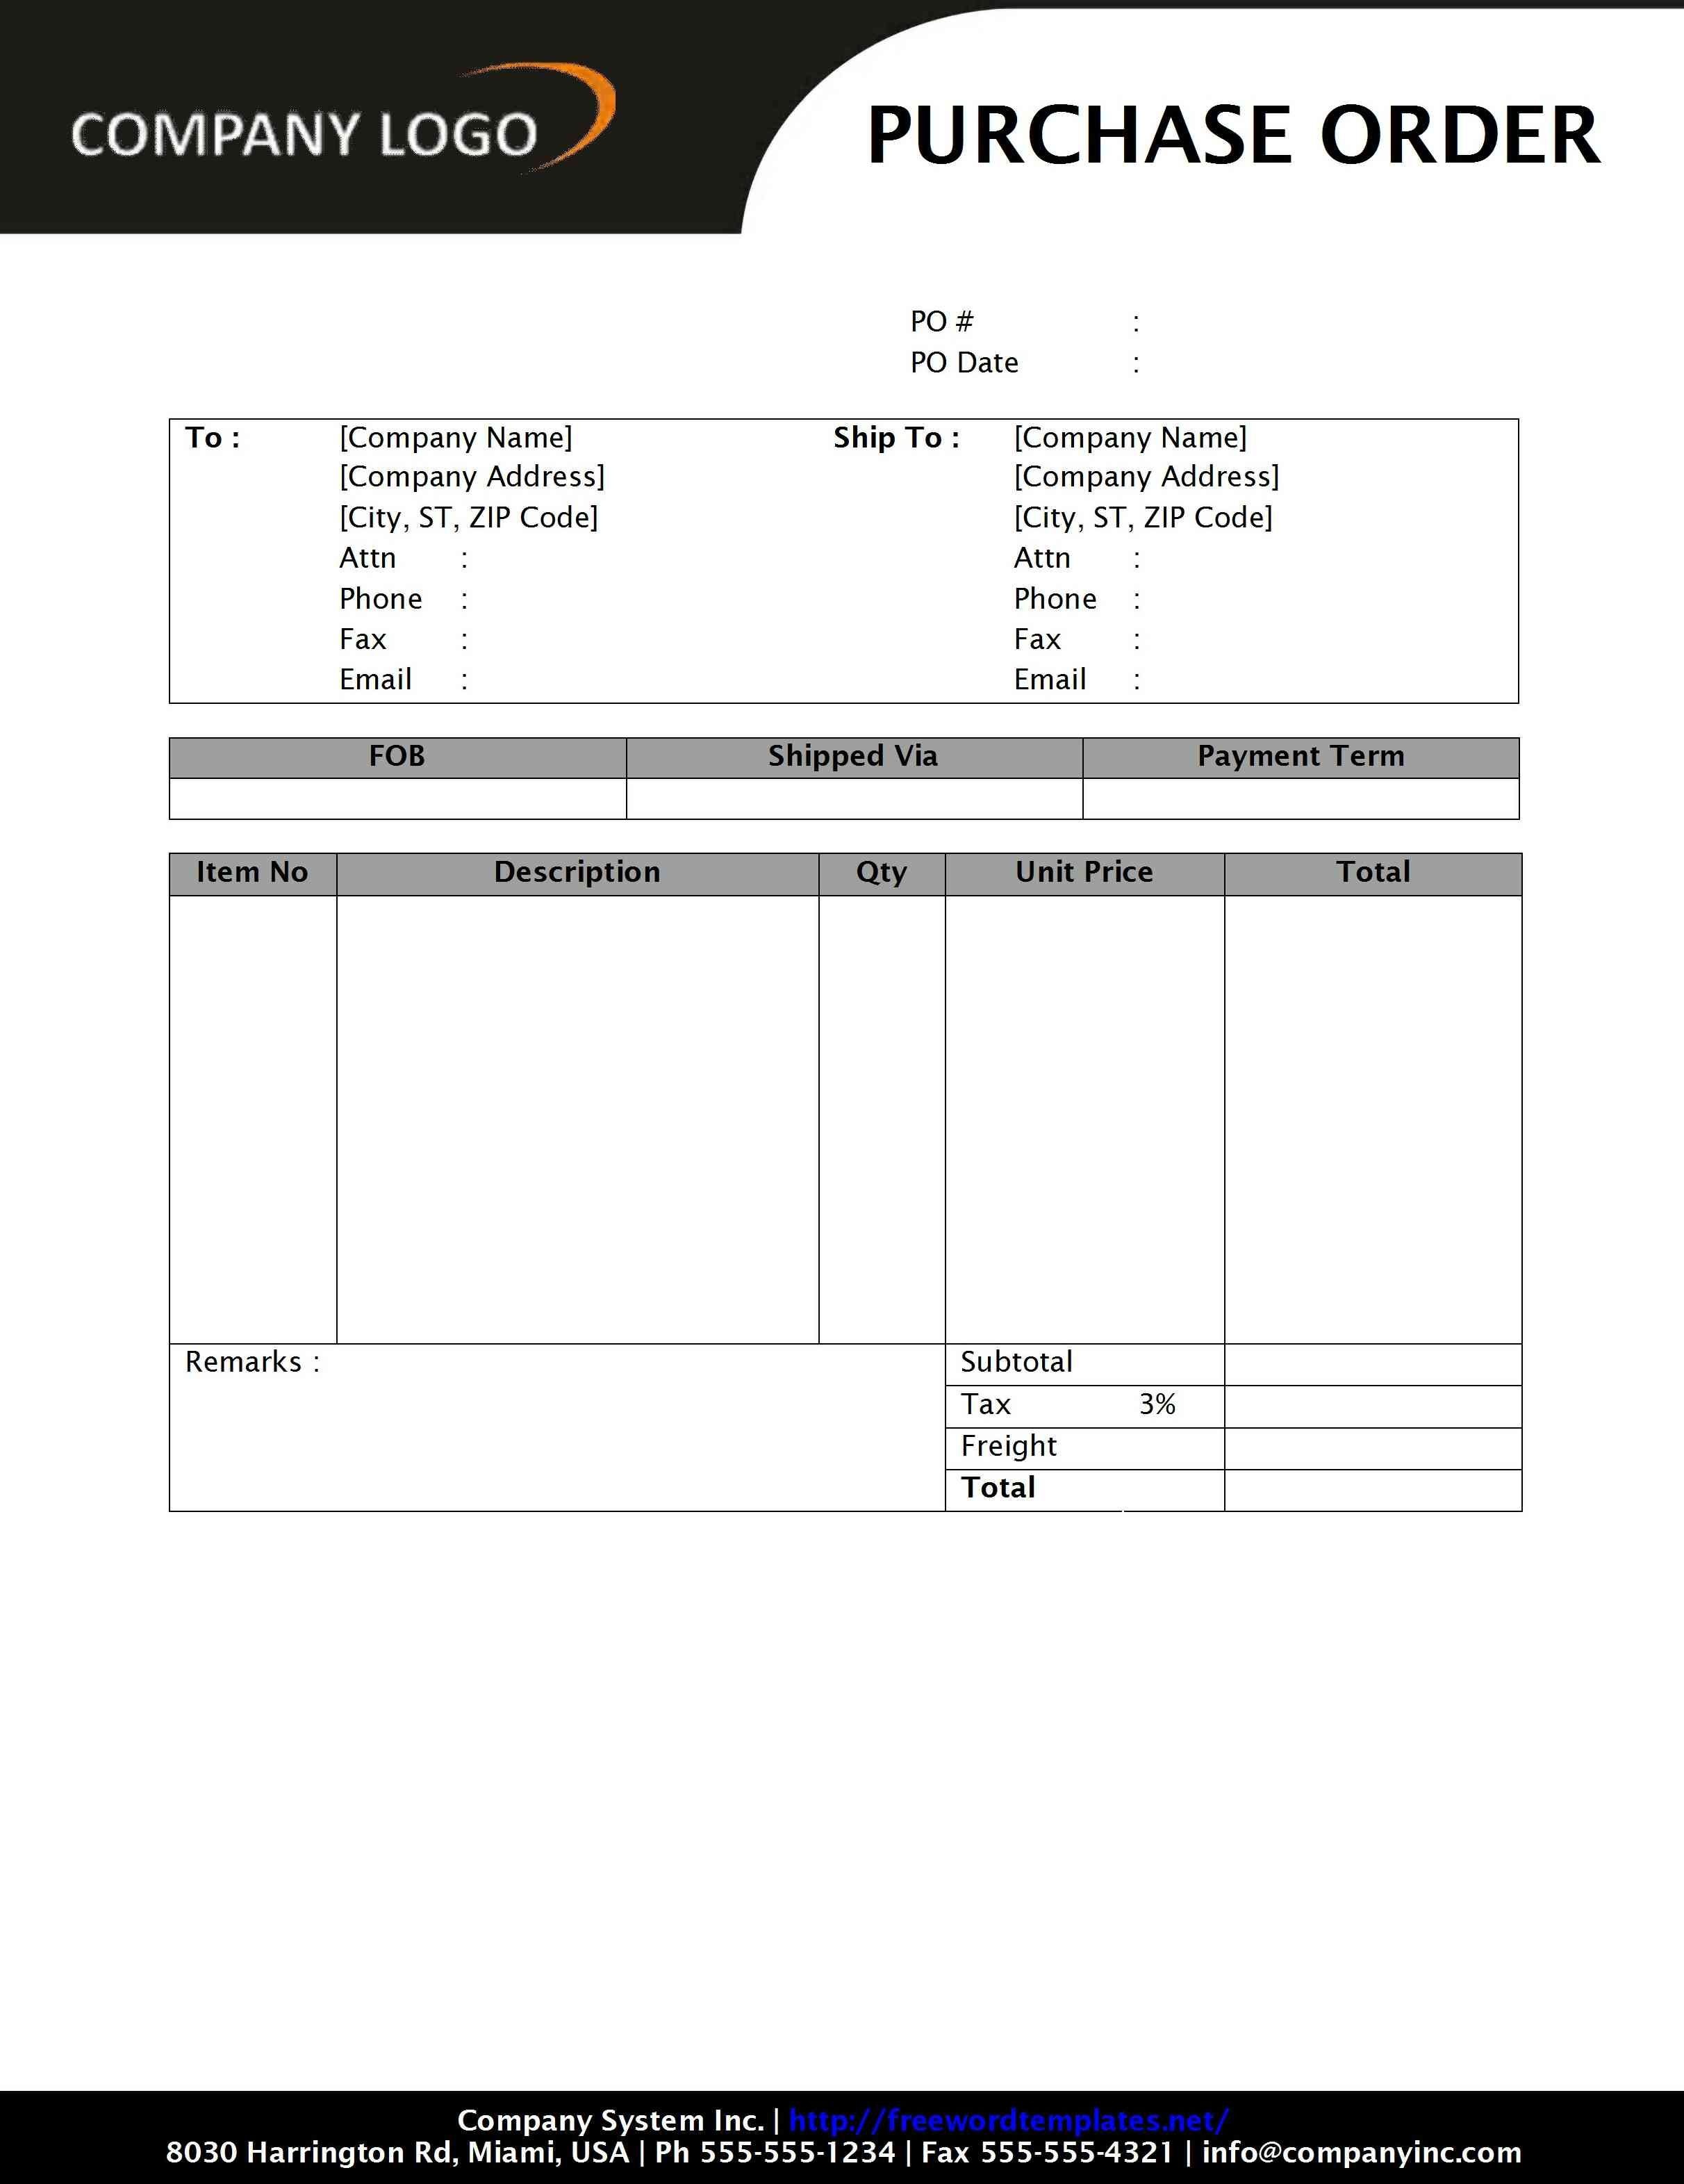 Pinshoaibshaaz On Delivery Note | Purchase Order, Order Form - Free Printable Business Forms